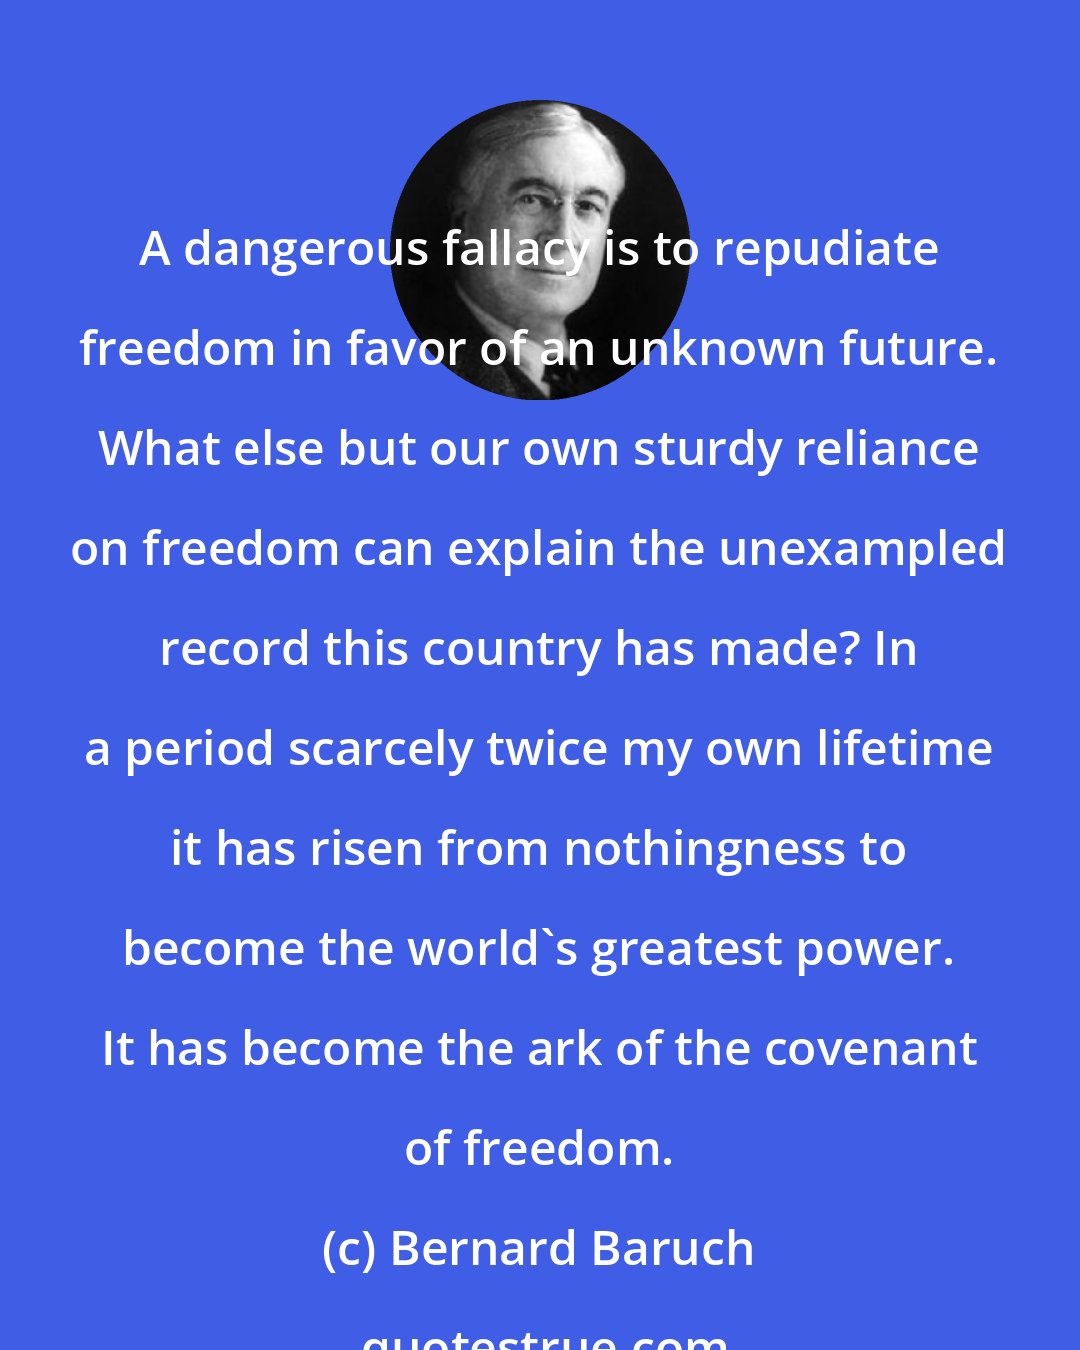 Bernard Baruch: A dangerous fallacy is to repudiate freedom in favor of an unknown future. What else but our own sturdy reliance on freedom can explain the unexampled record this country has made? In a period scarcely twice my own lifetime it has risen from nothingness to become the world's greatest power. It has become the ark of the covenant of freedom.